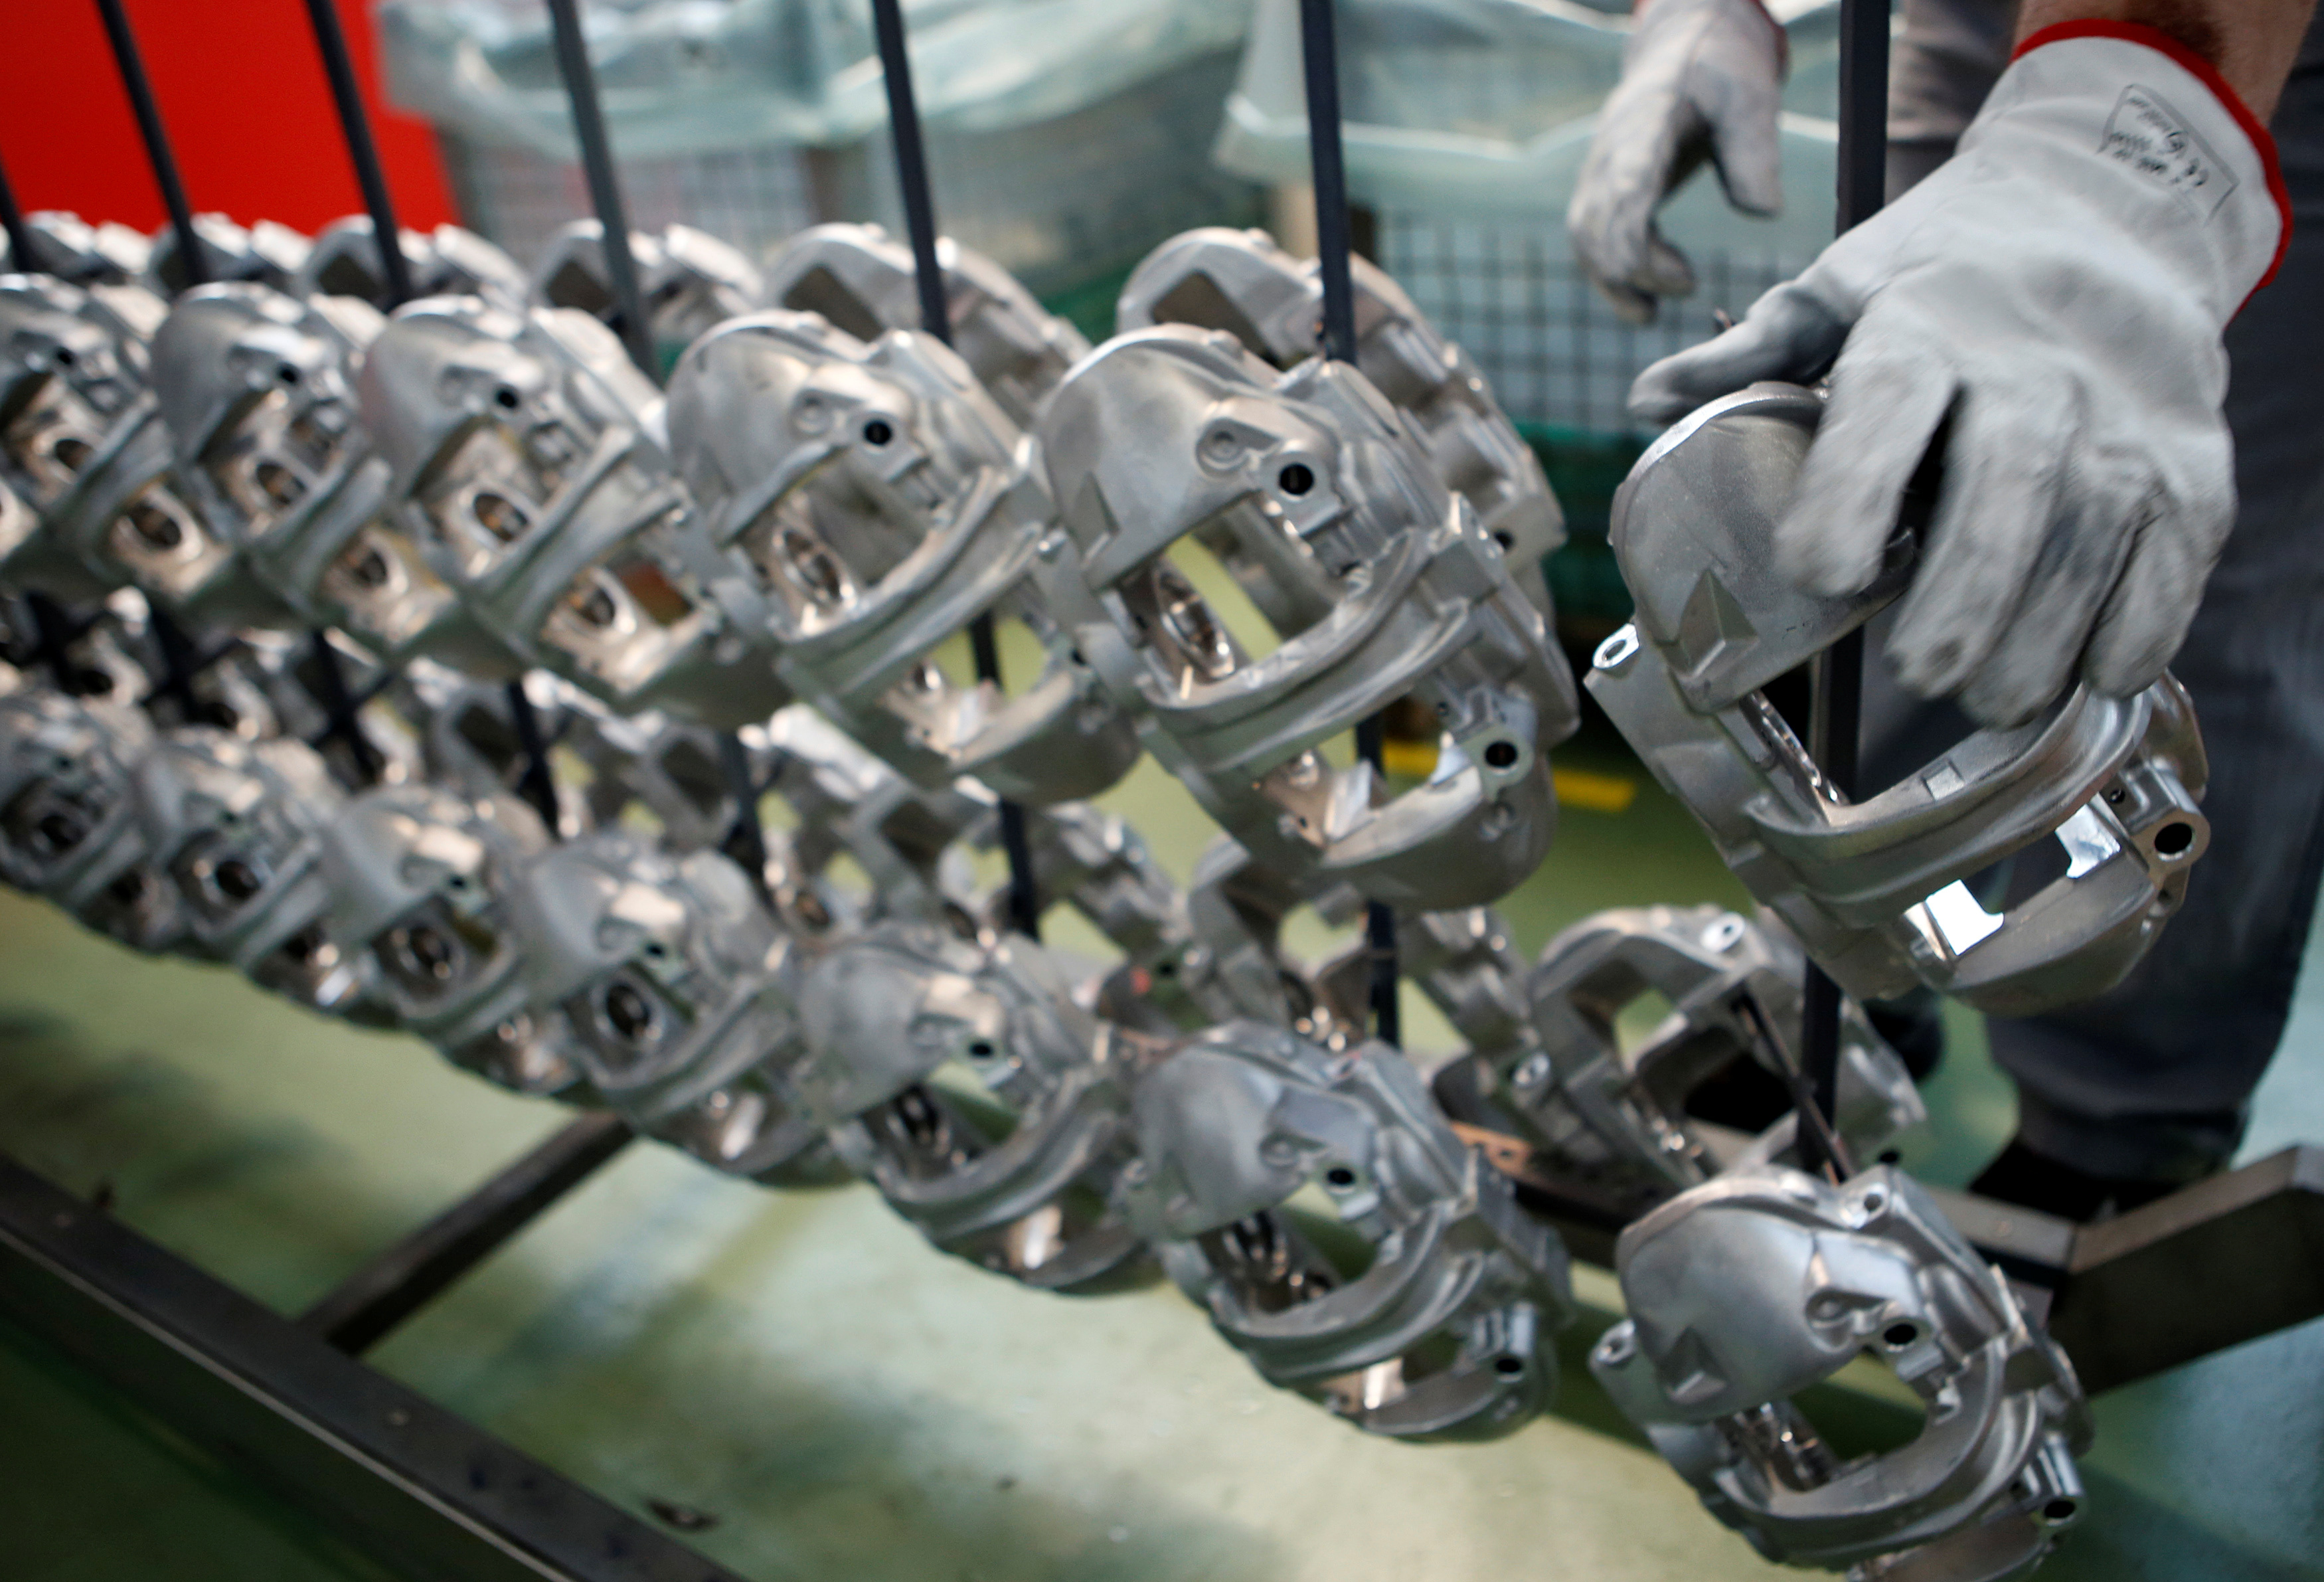 A technician works on brake disc components in the Brembo factory in Curno